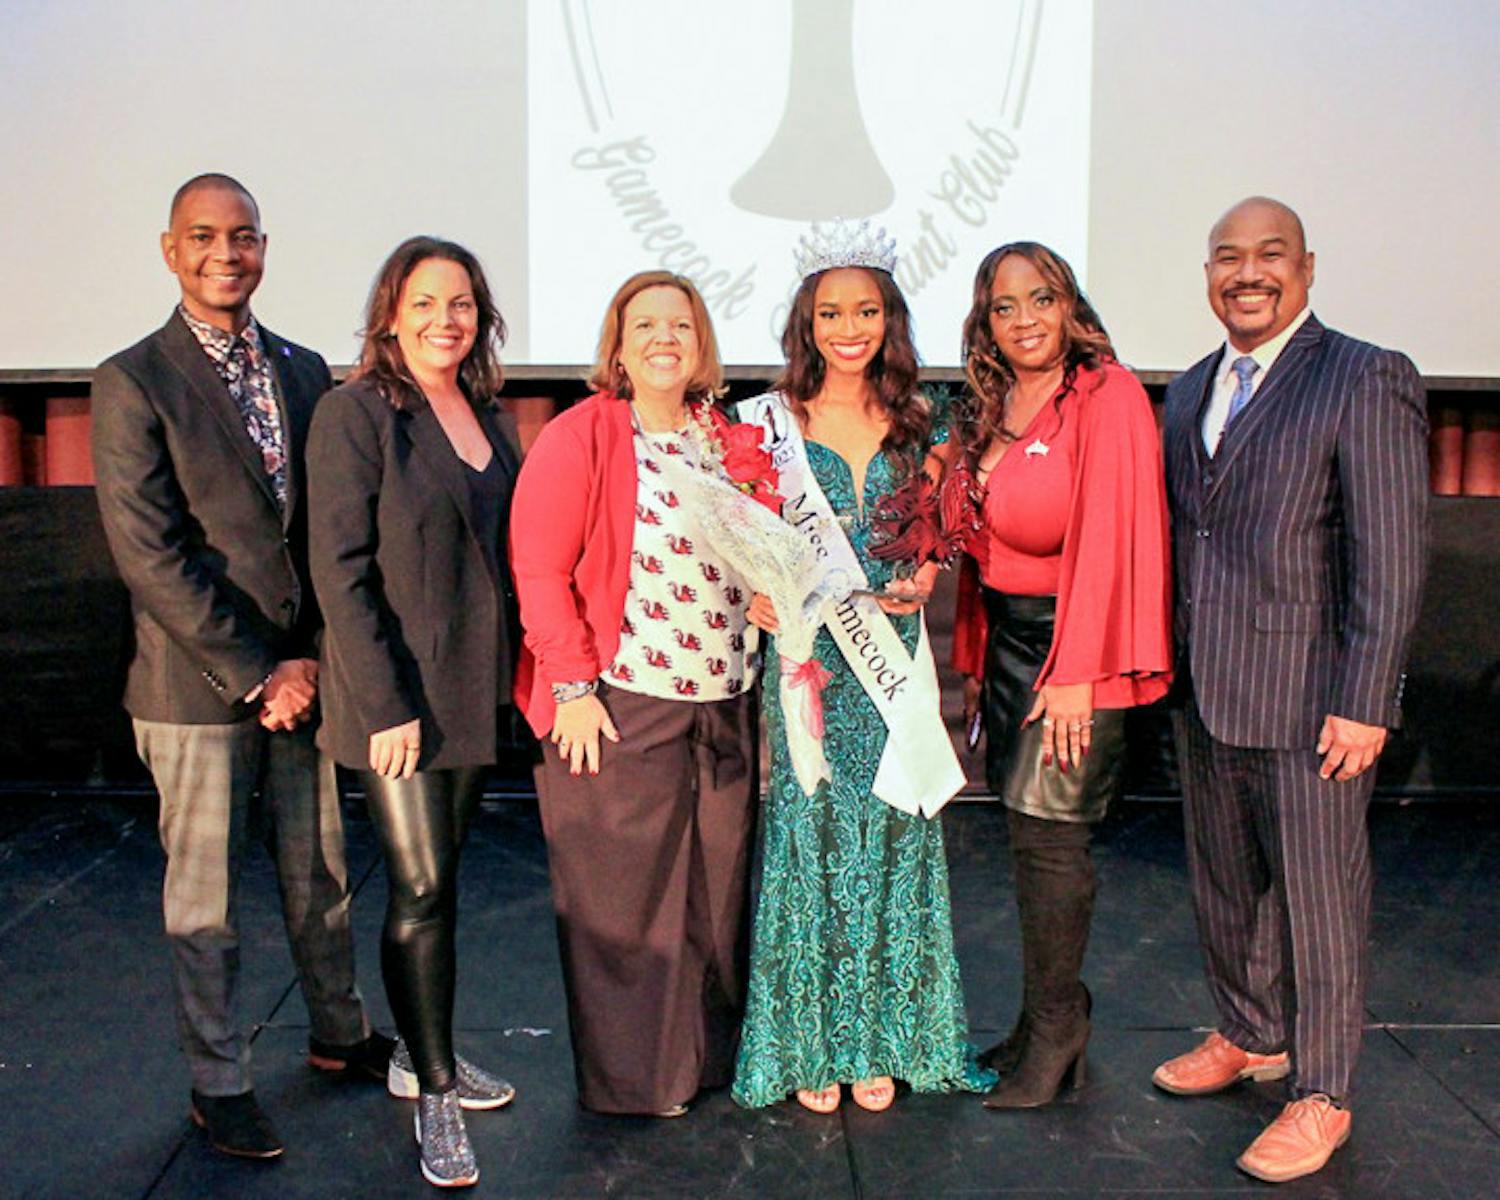 Third-year retail student Jordyn Lewis (center, right) stands amongst judges after winning the Miss Gamecock pageant on Nov. 12, 2022. This was Lewis' first time entering the pageant, and she is the second Black woman to win the contest in  history.